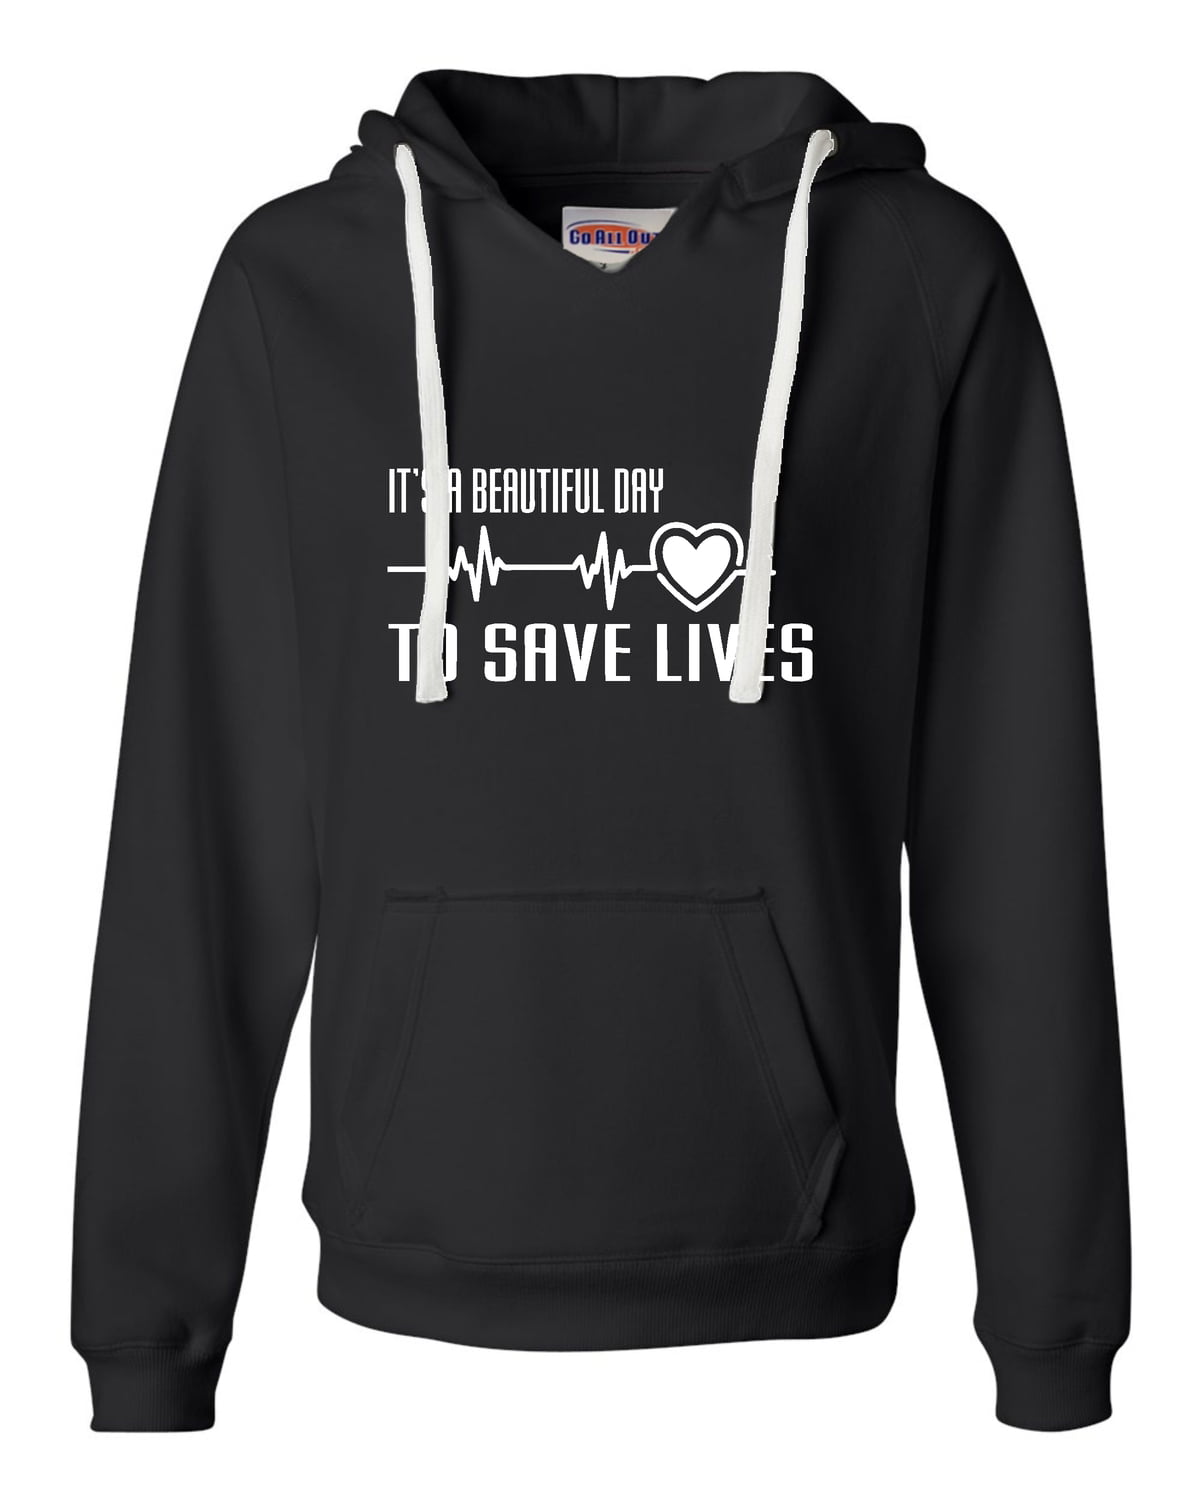 Cloud City 7 Its a Beautiful Day To Save Lives Womens Hooded Sweatshirt 